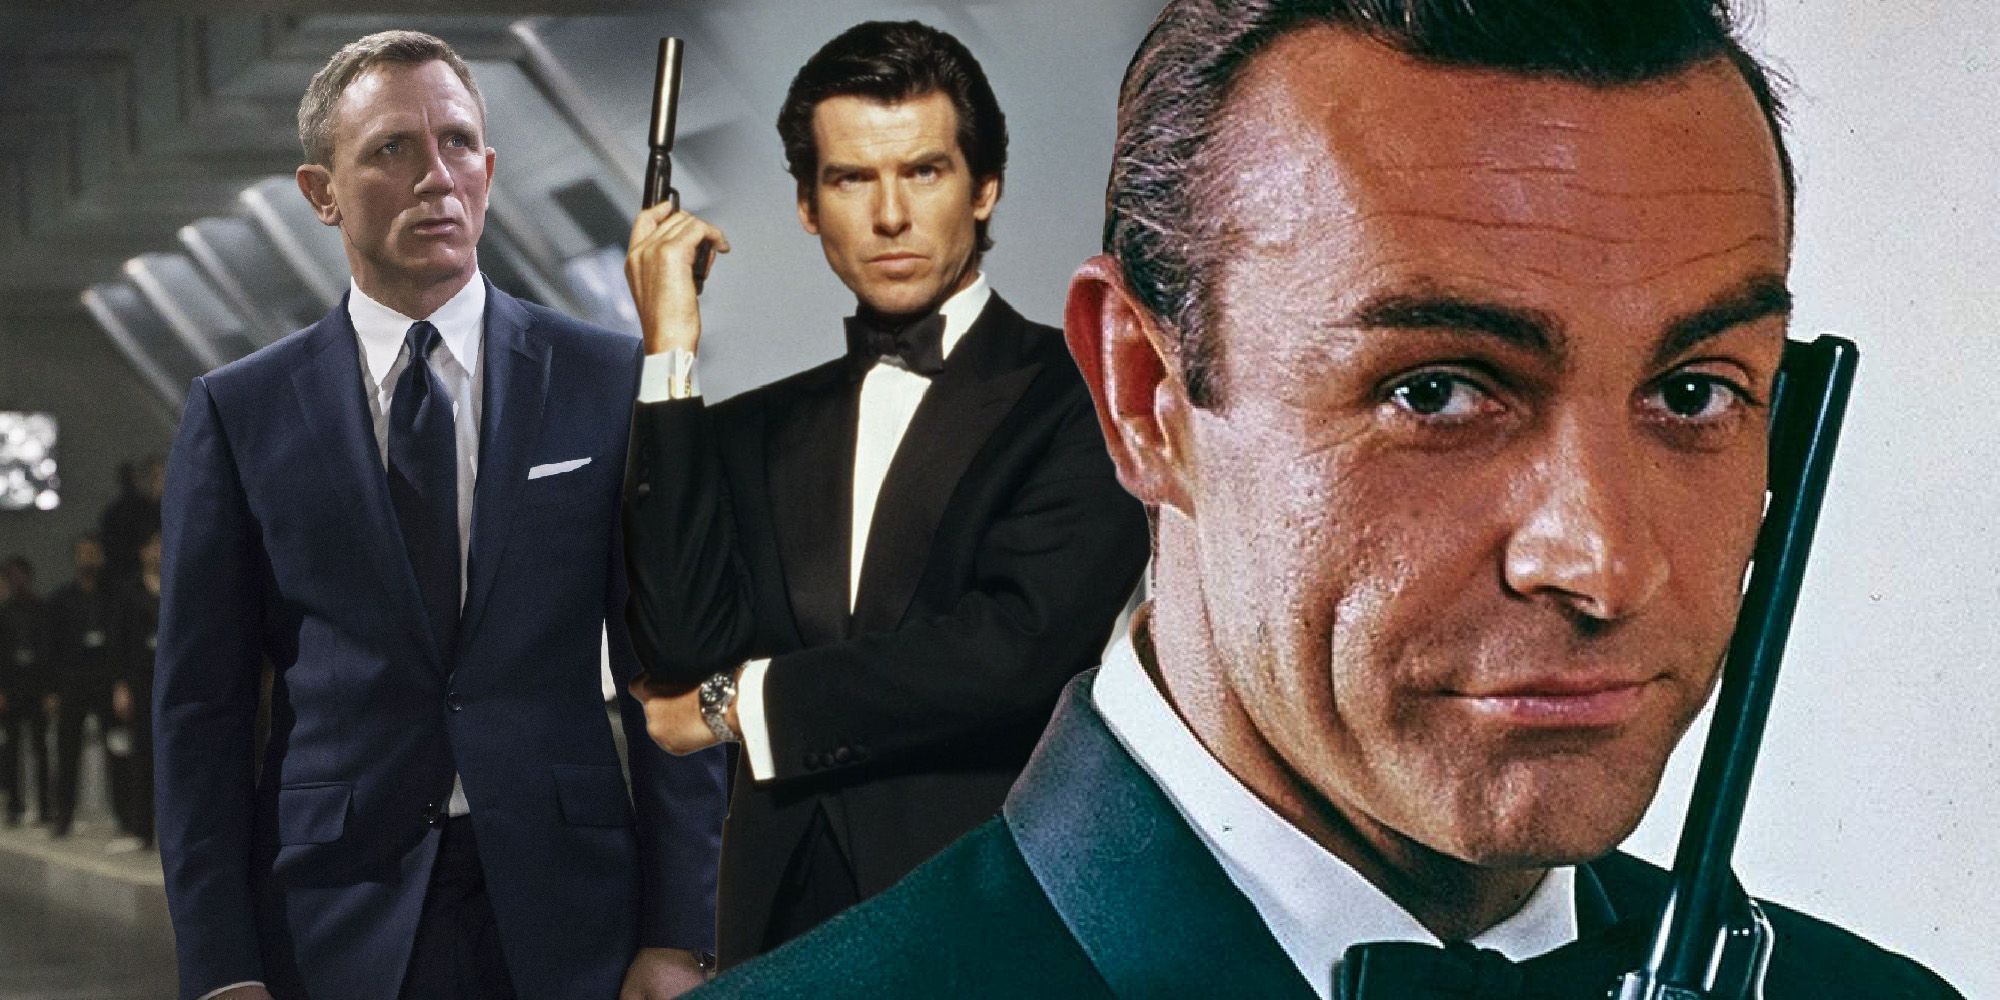 Blended image of Daniel Craig, Pierce Brosnan, and Sean Connery as James Bond